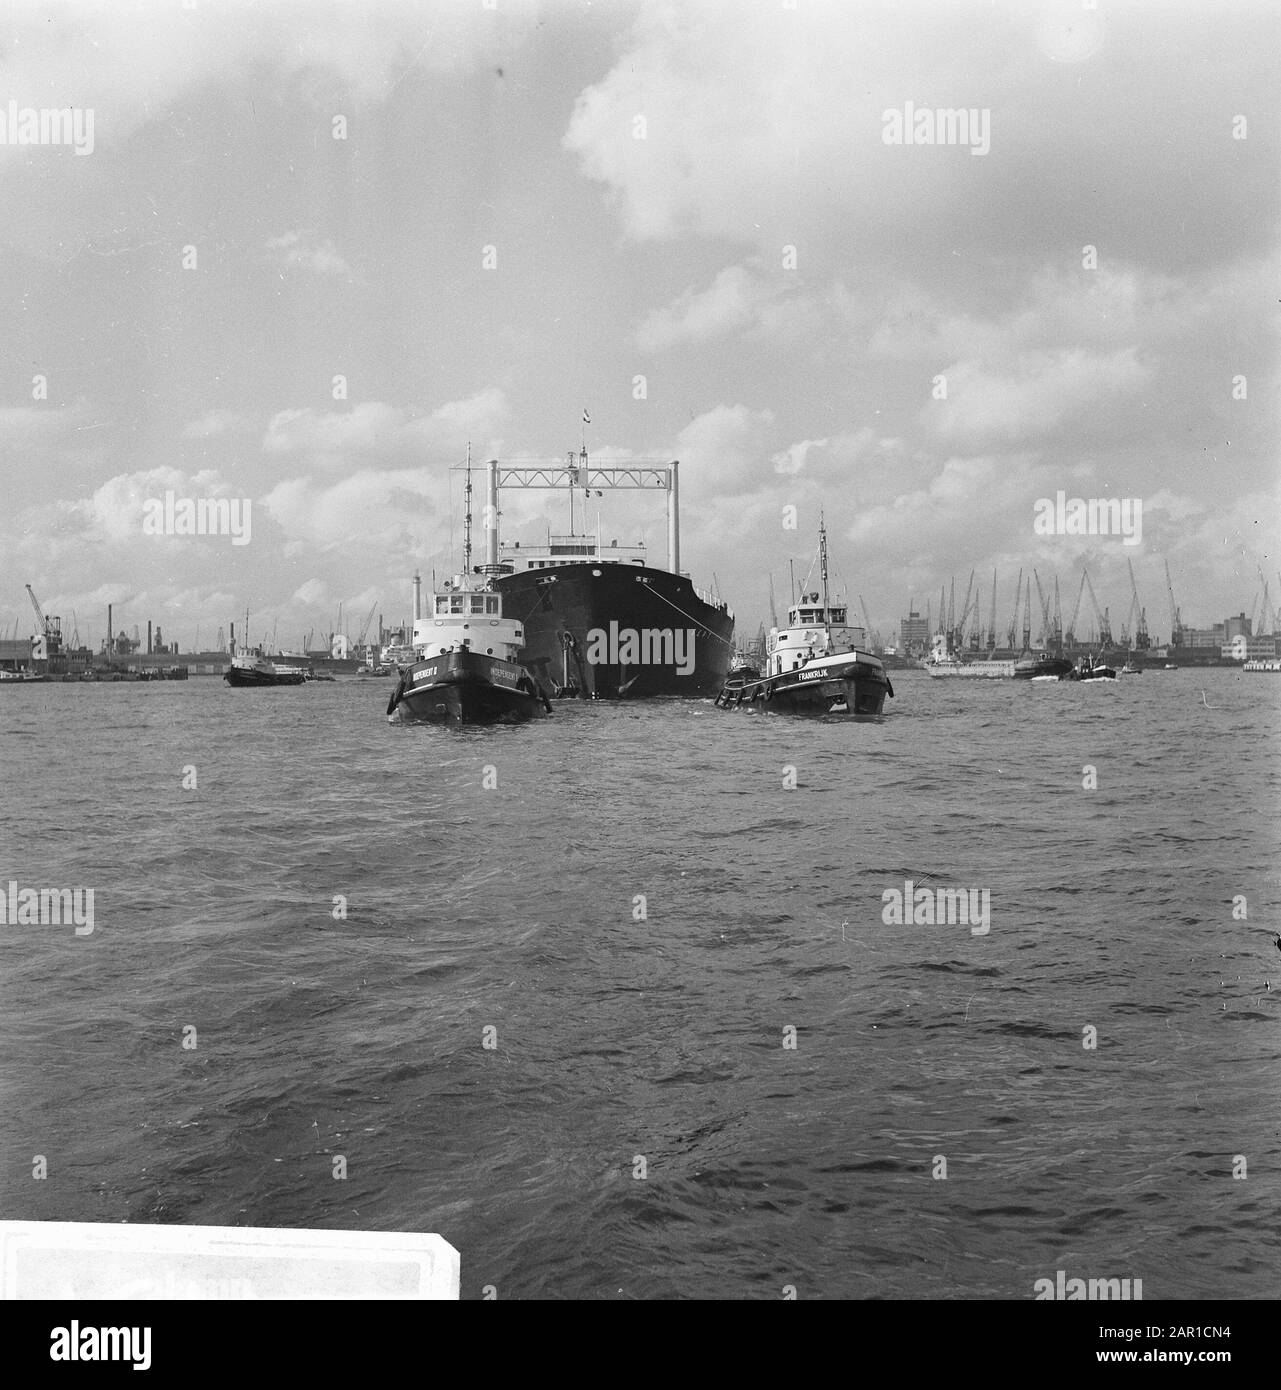 Harbour faces Rotterdam, tugs stories supertanker in the Waalhaven Annotation: Tug front left is the Independent III, in addition the France. The tanker is called Sept Iles Date: 9 September 1965 Location: Rotterdam, Zuid-Holland Keywords: Harbour views, Tugboats, Supertankers Stock Photo